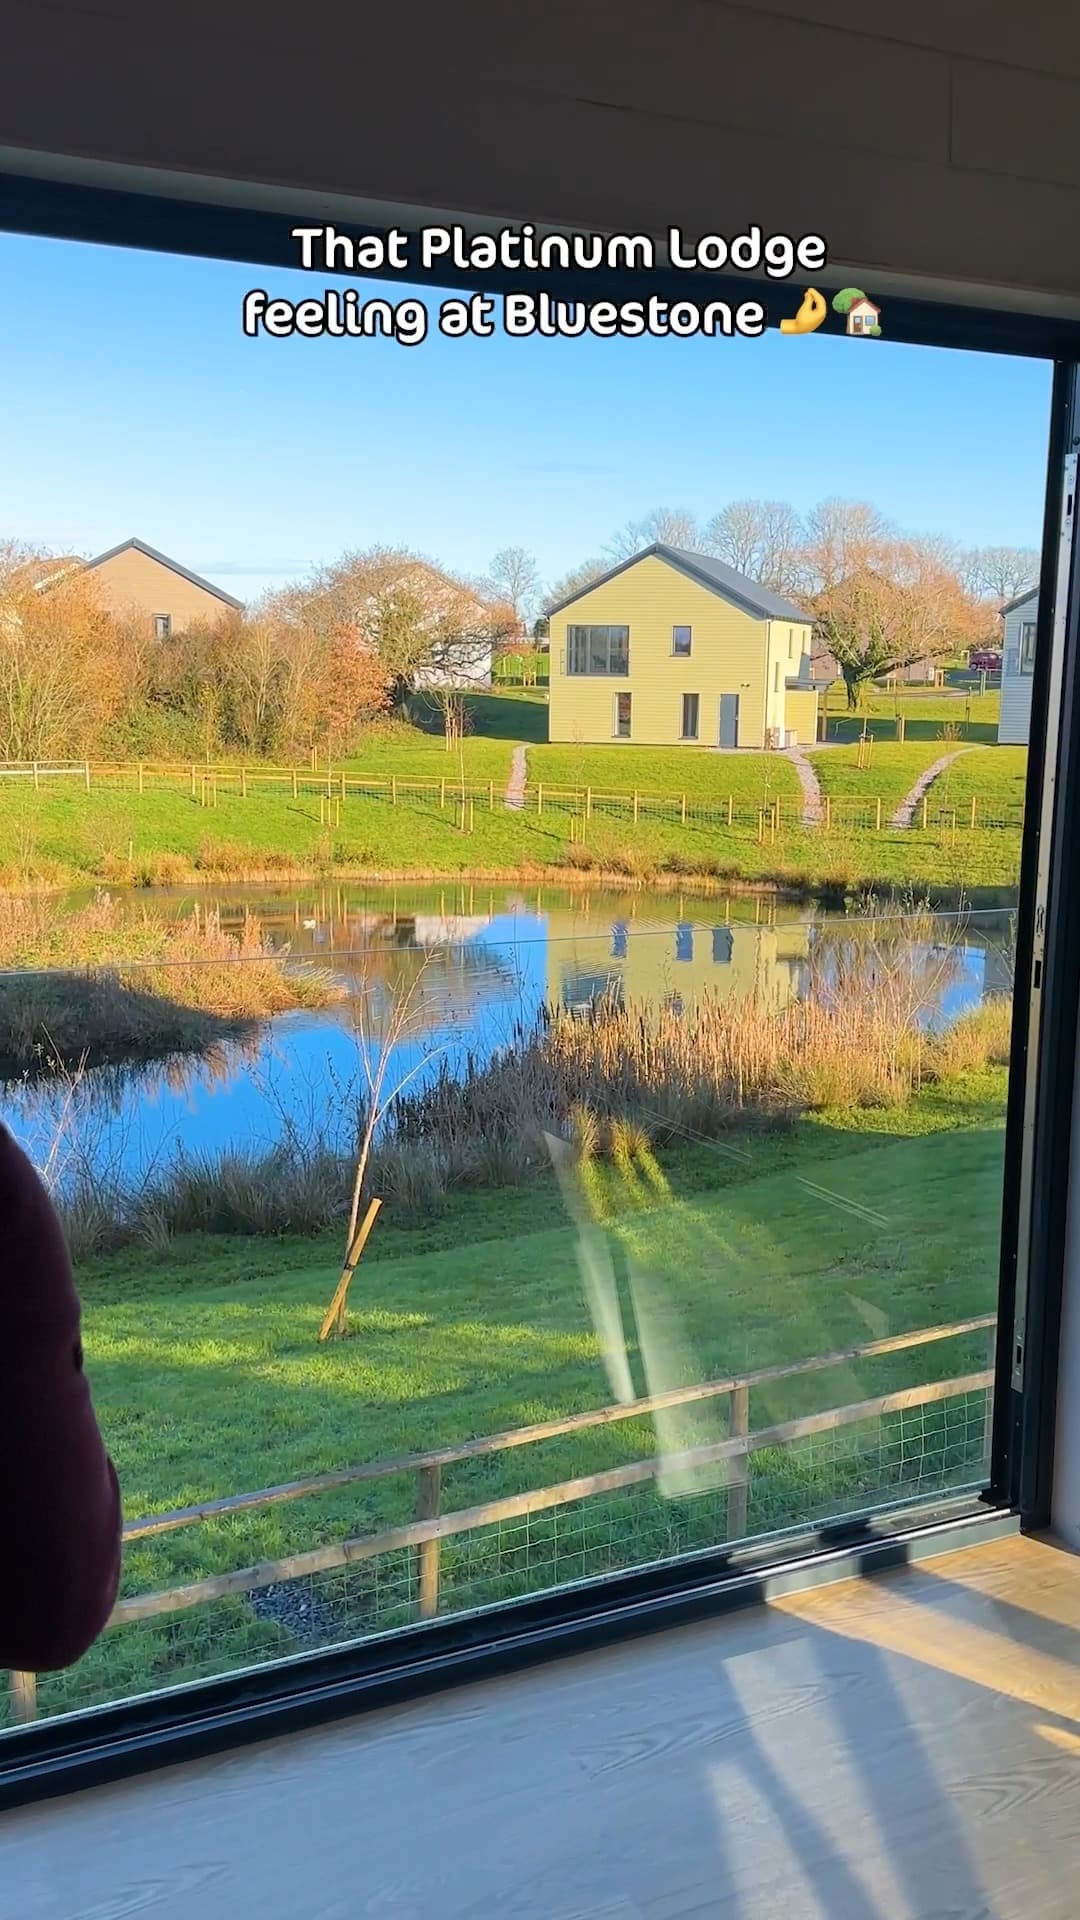 Pov: the race for the best room in the house 🤩🏃‍♀️

Lake or forest view, which one are you? 🌳

#MyBluestoneBreak #WelcomeToOurNeighbourhood #VisitPembrokeshire